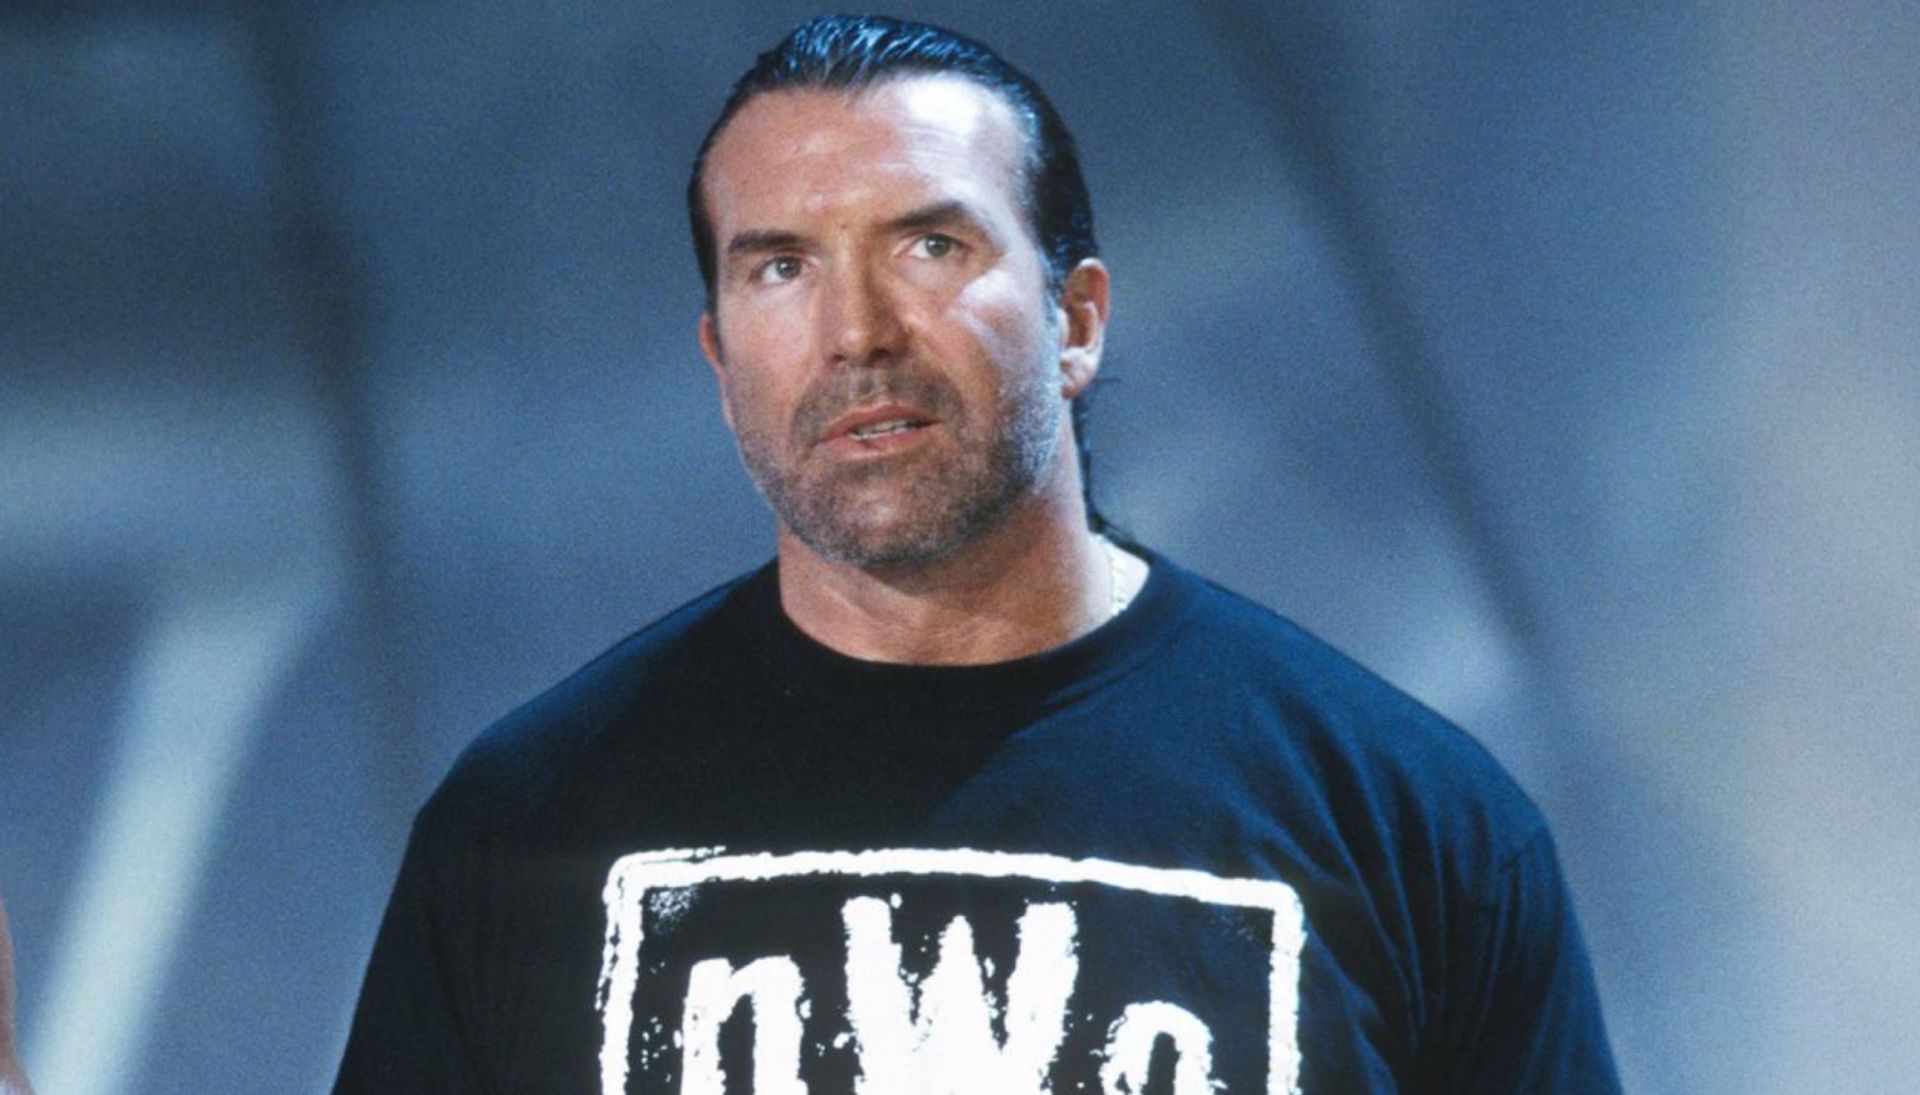 Scott Hall is a 2-time WWE Hall of Famer